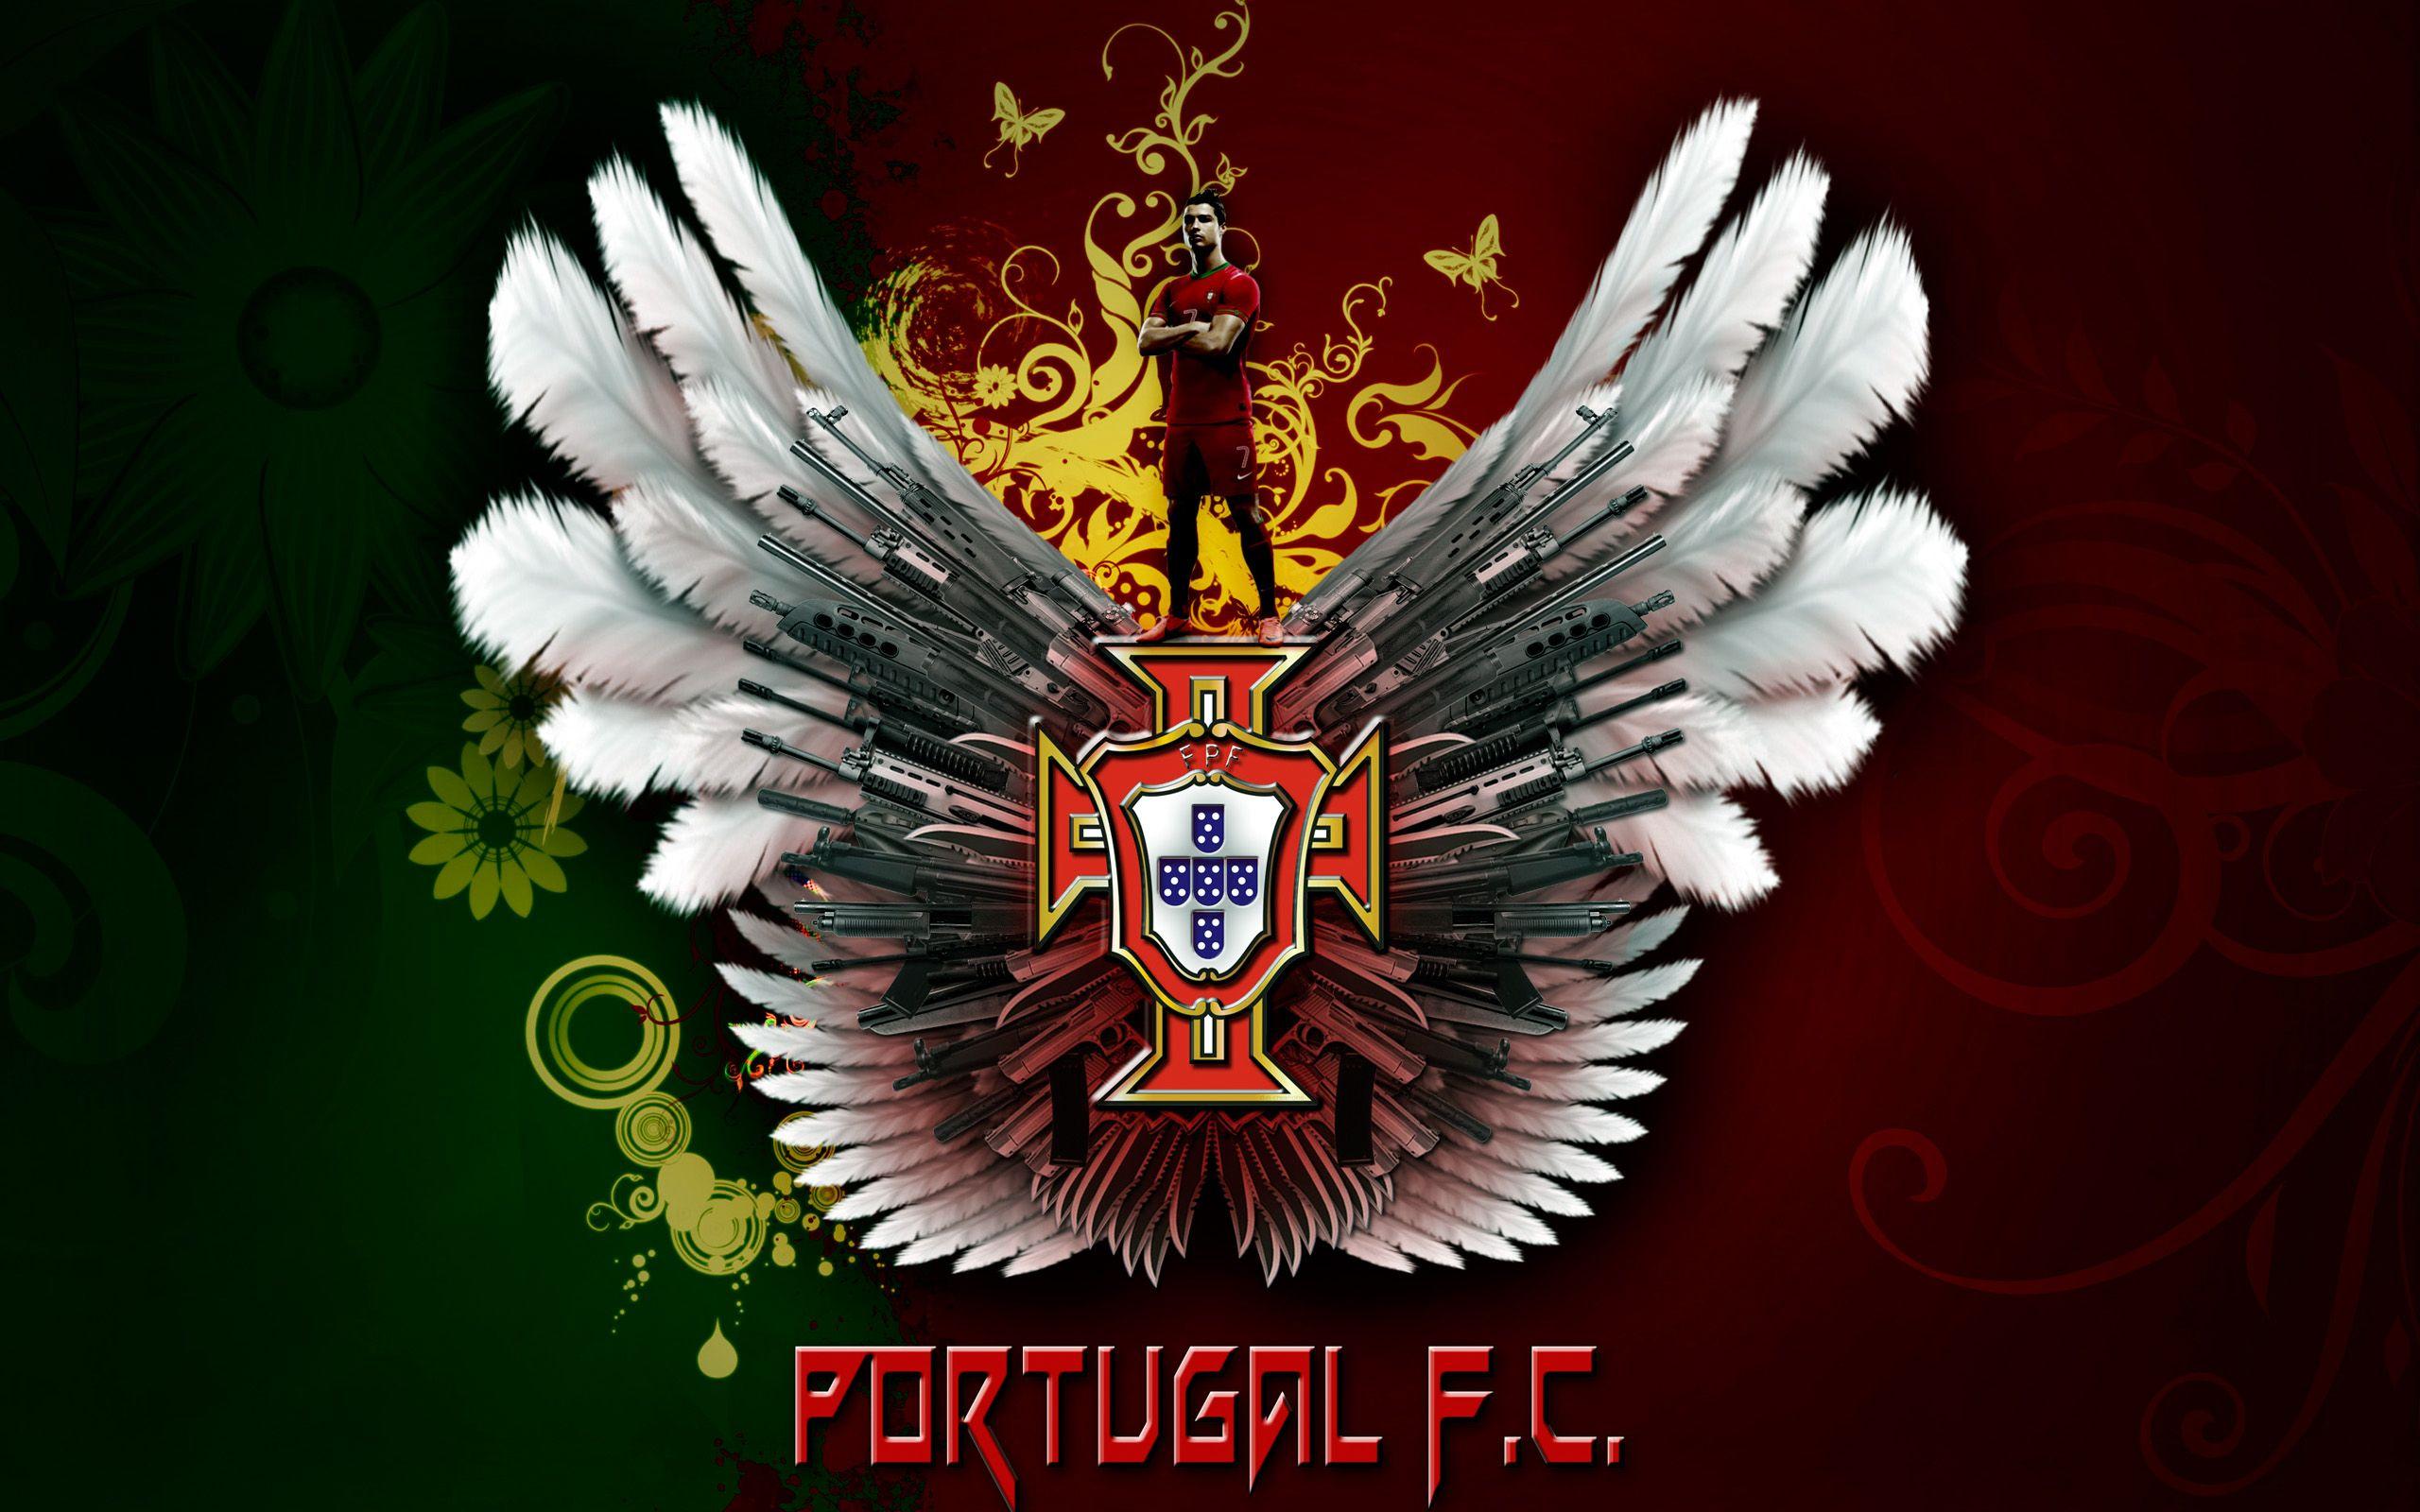 Portugal Football Wallpaper, Background and Picture